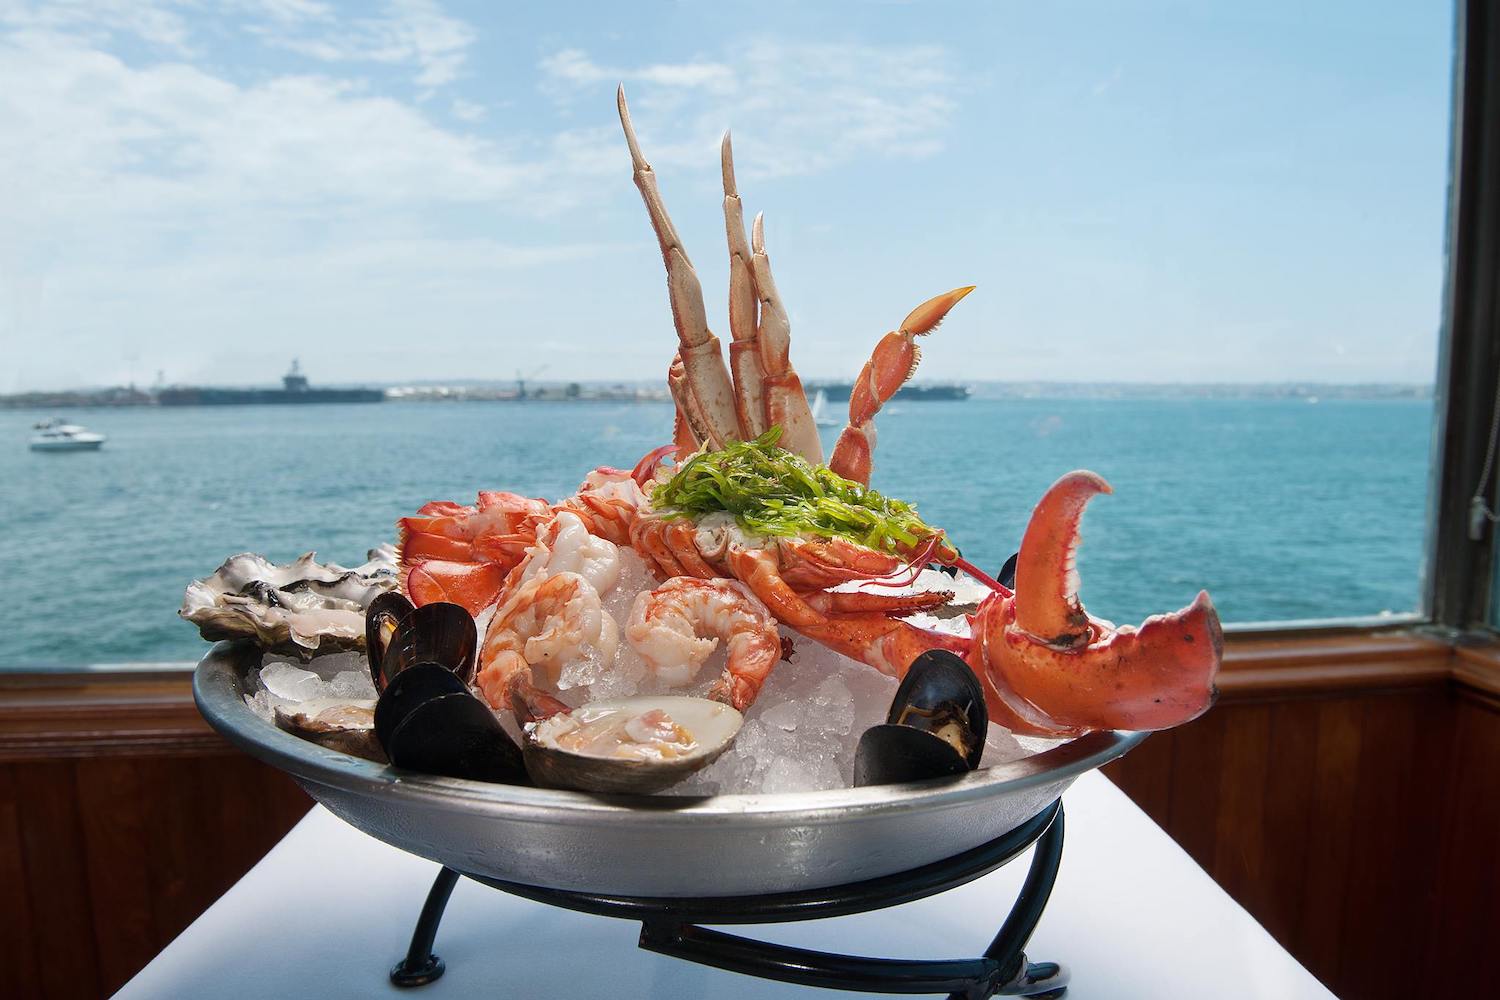 A seafood platter from Top of the Market rooftop restaurant overlooking the San Diego Bay